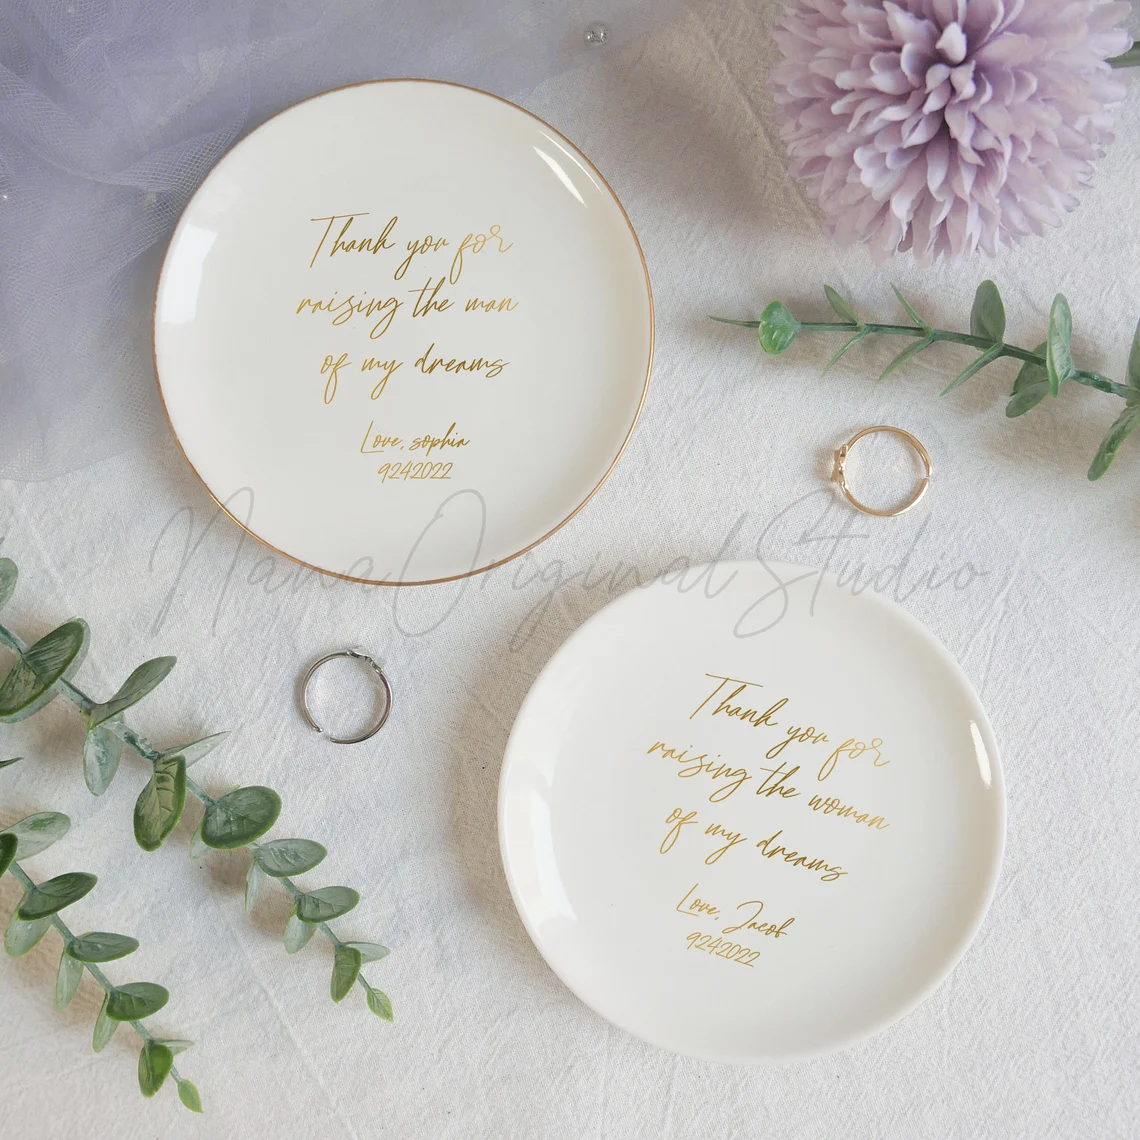 7 Mother Of The Groom Gift Ideas For Your Wedding Day